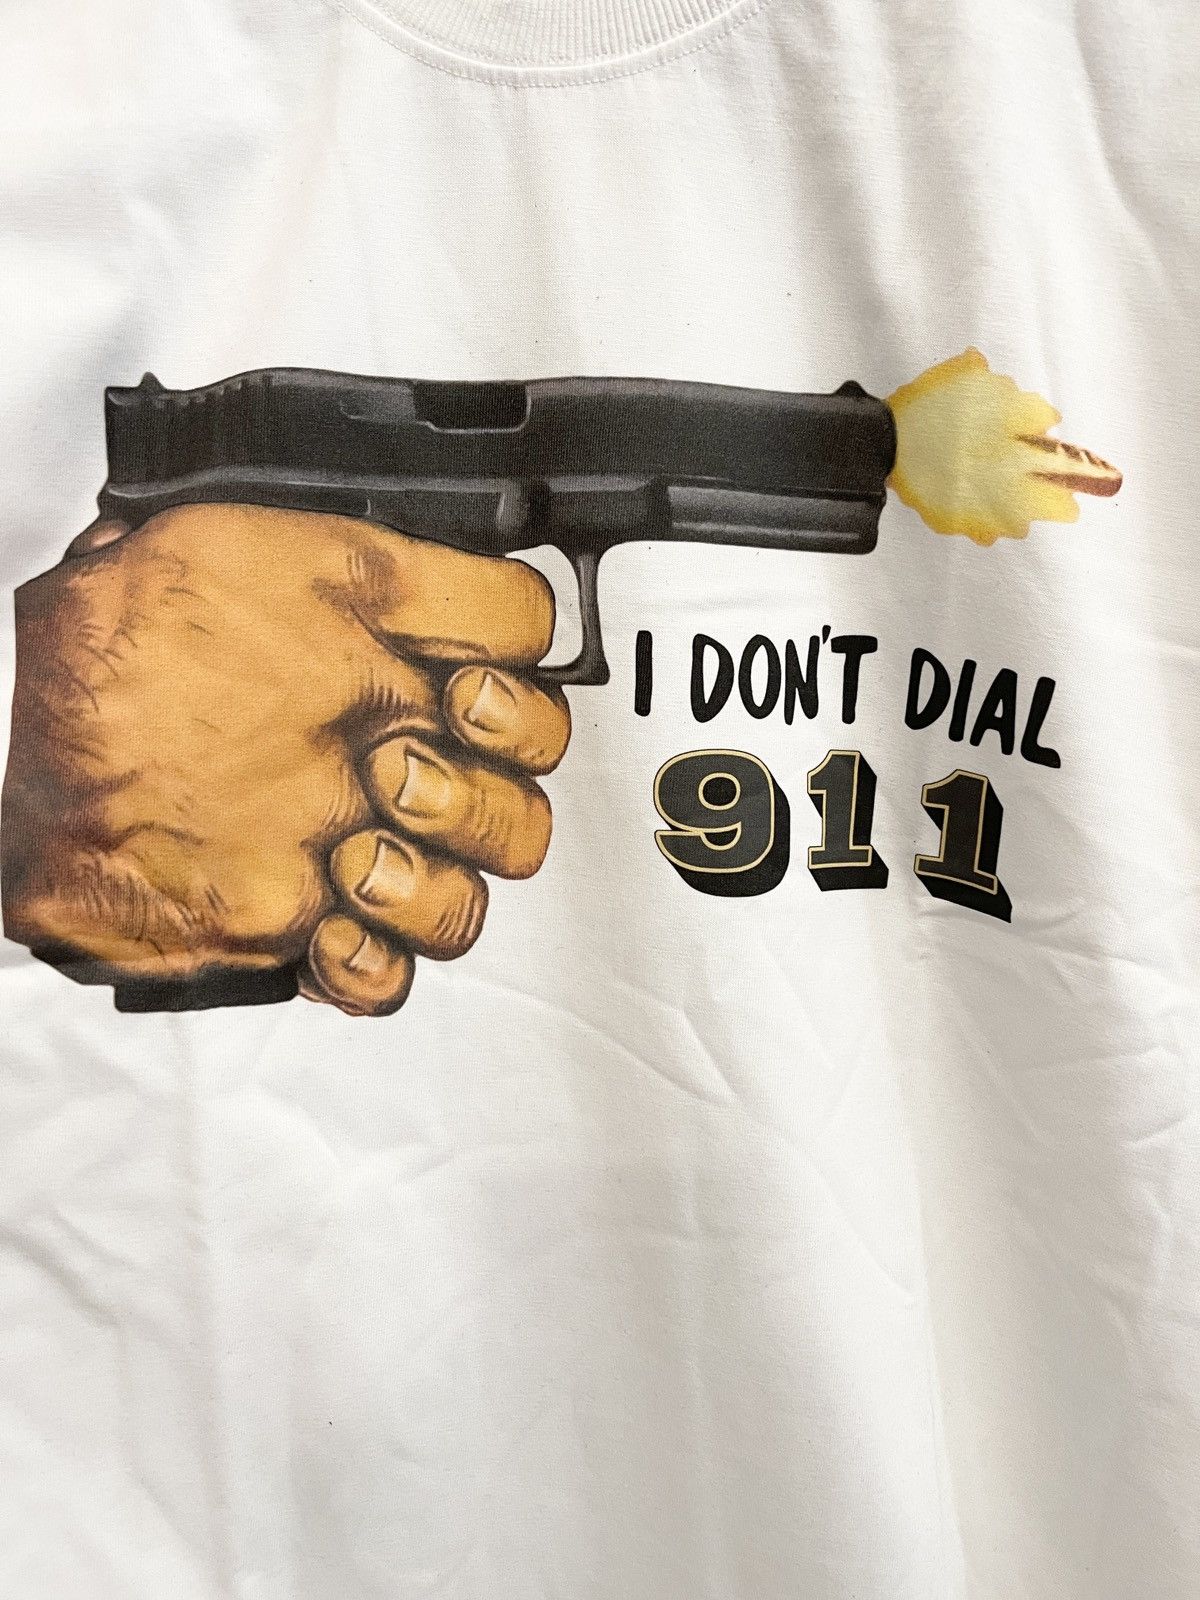 Vintage - STEAL! I don’t dial 911 Tee - 2